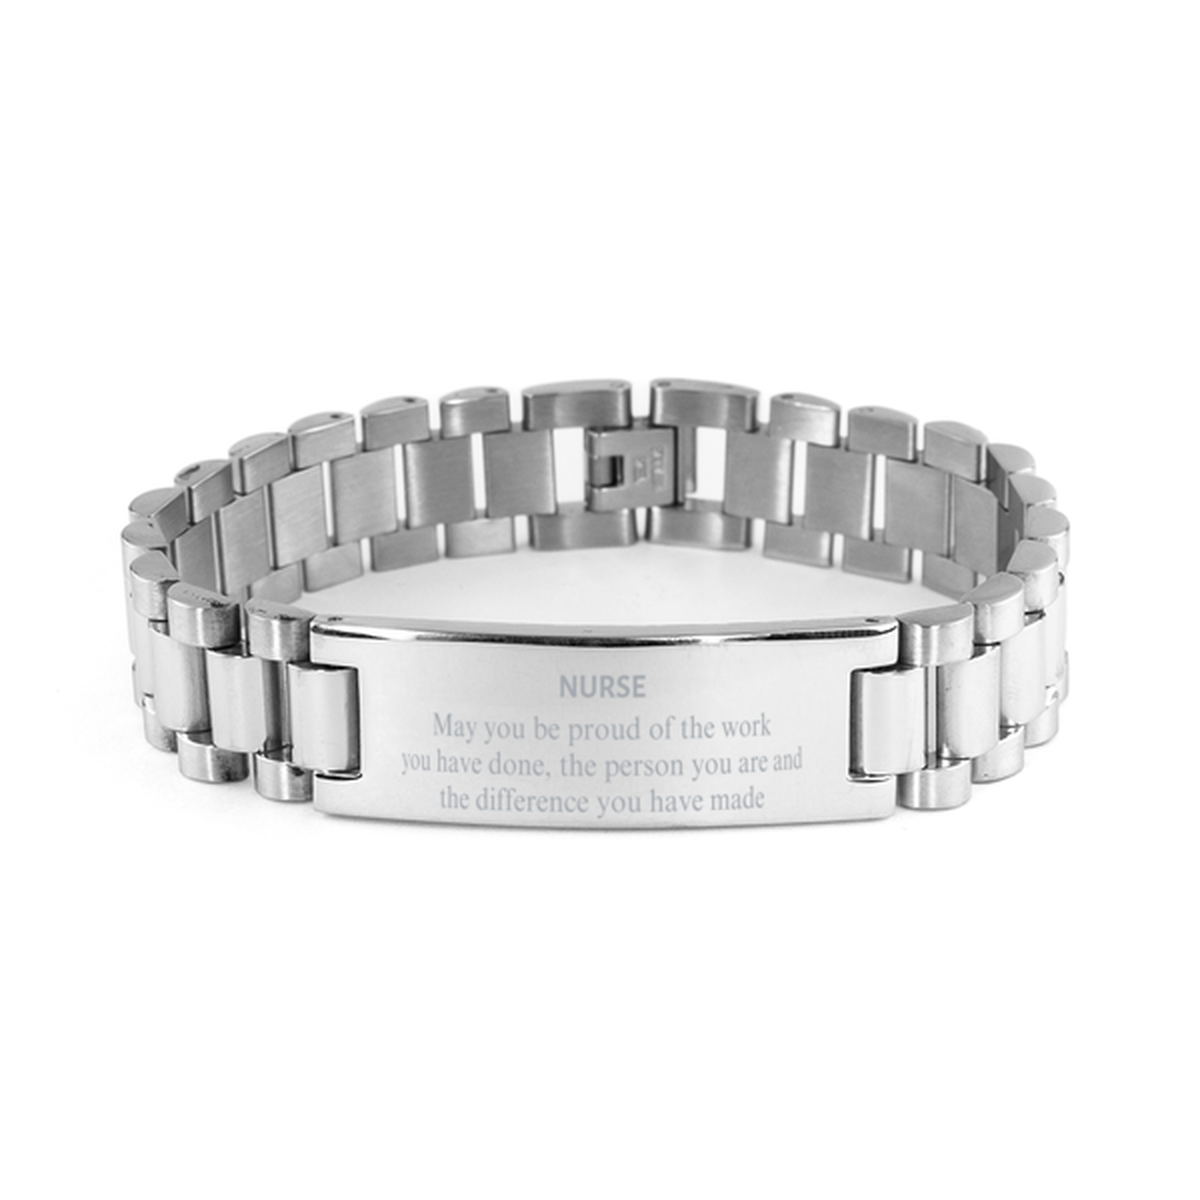 Nurse May you be proud of the work you have done, Retirement Nurse Ladder Stainless Steel Bracelet for Colleague Appreciation Gifts Amazing for Nurse